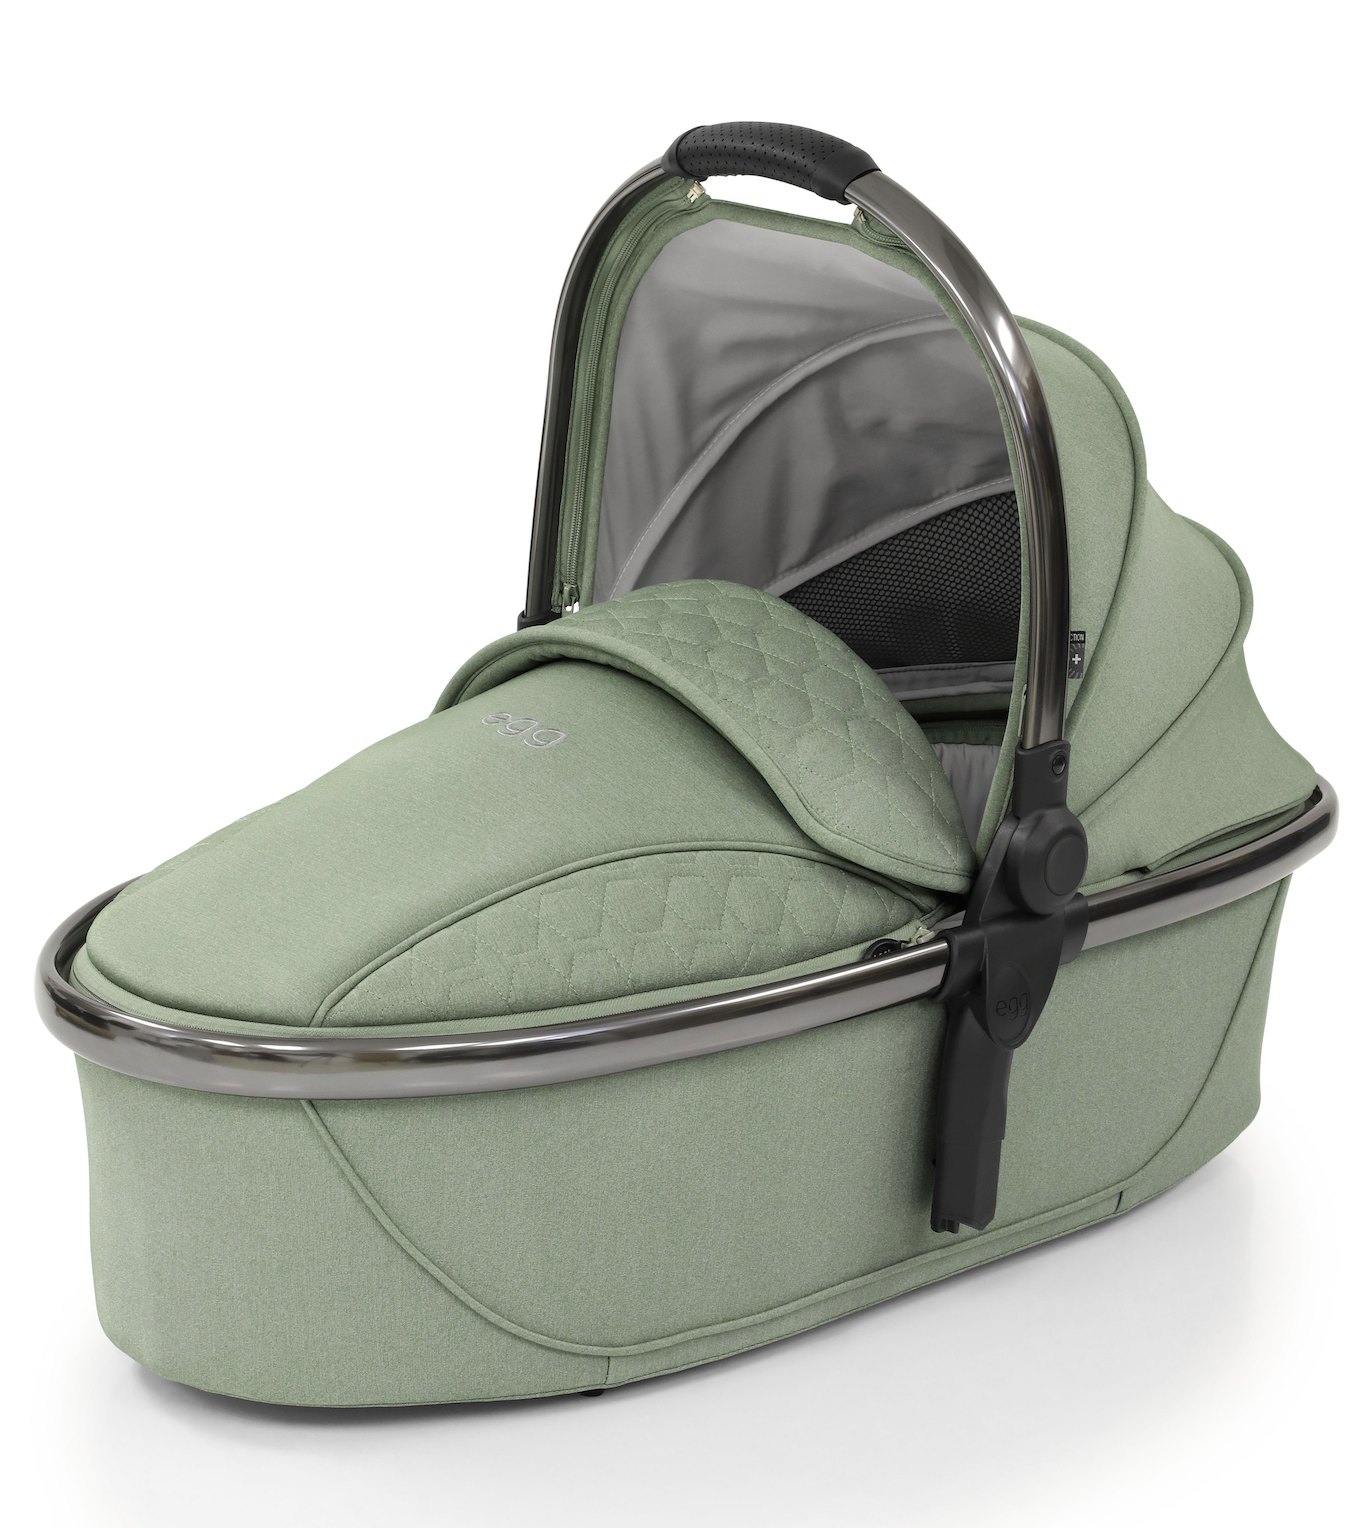 Egg 2 Carrycot - Seagrass